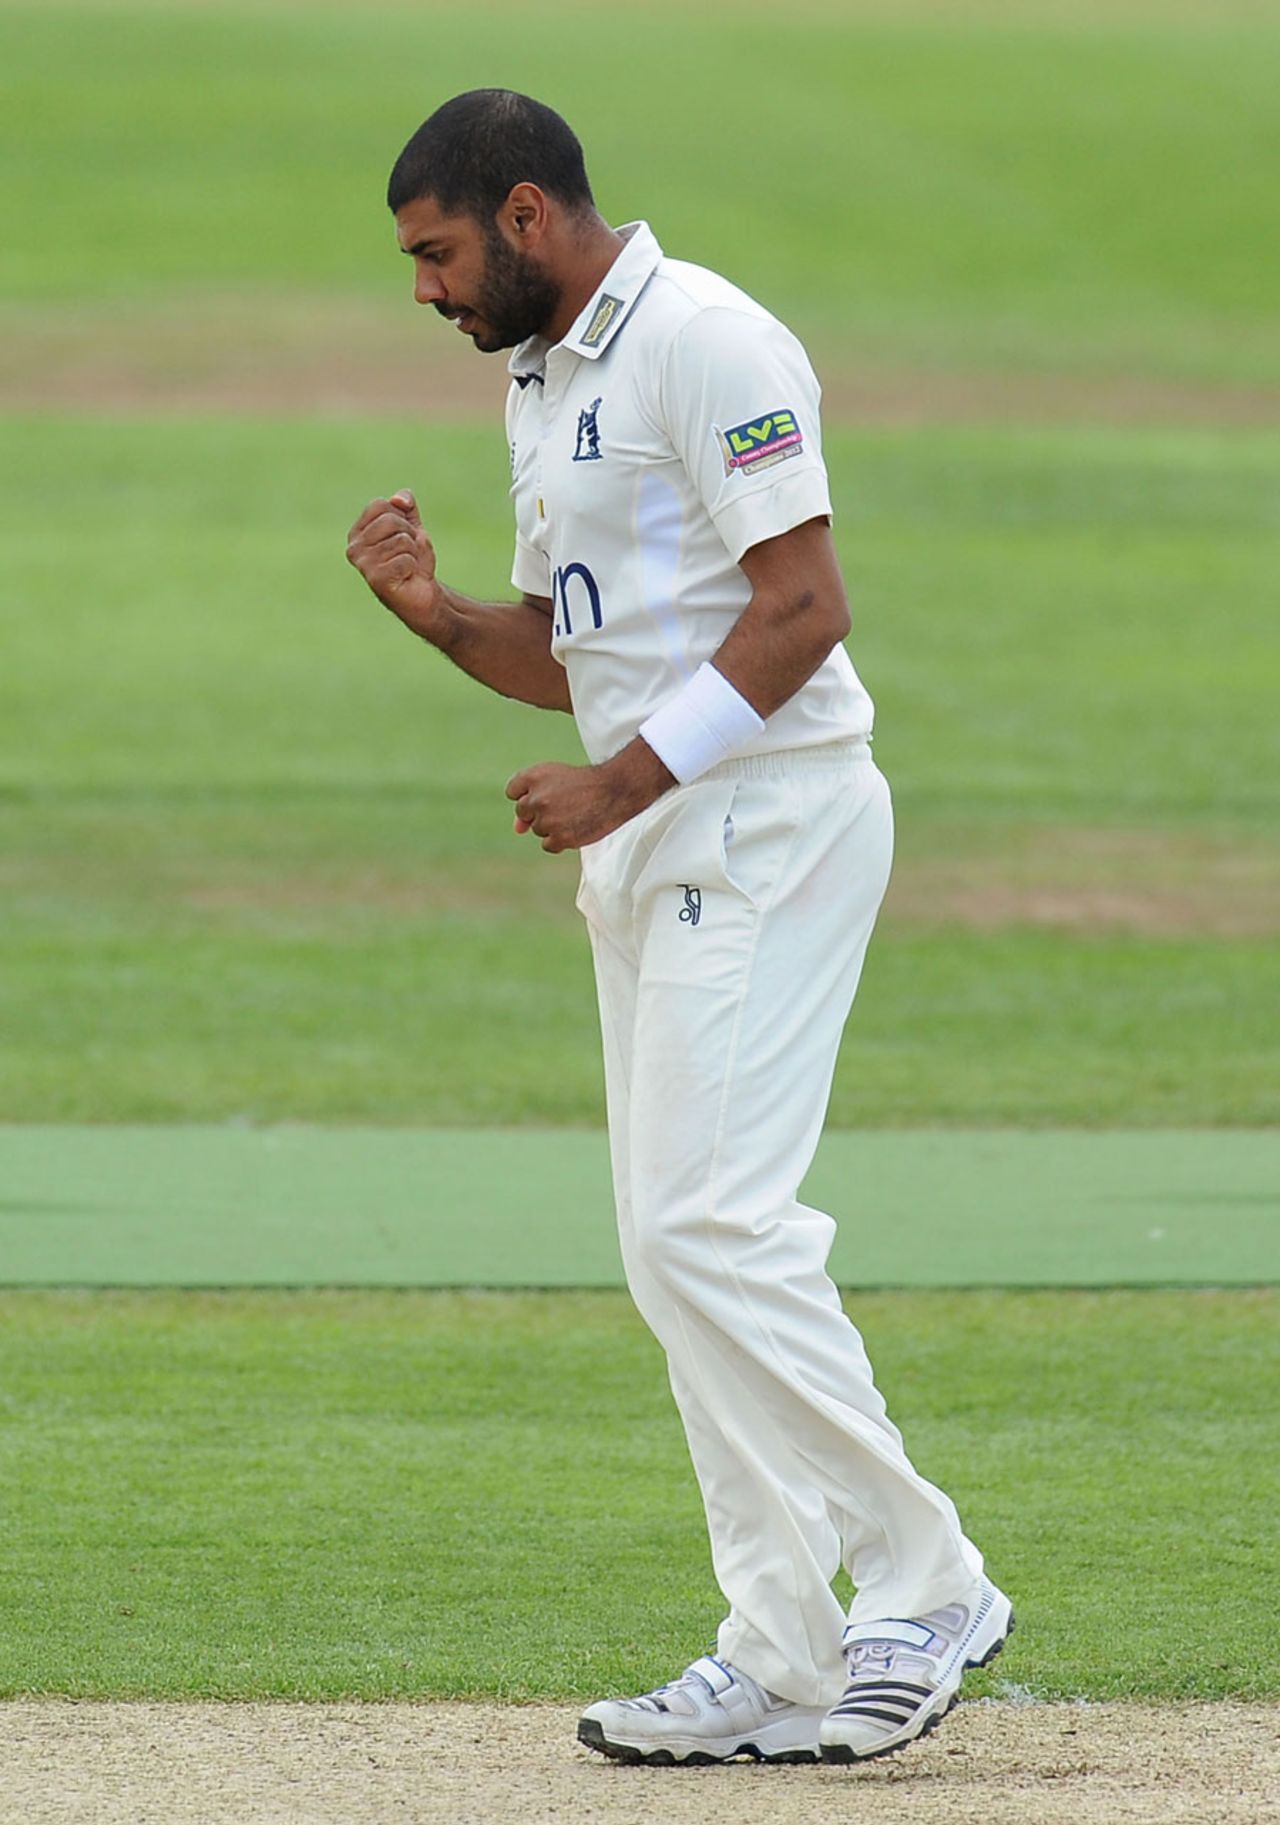 Jeetan Patel celebrates one of his two wickets, Warwickshire v Middlesex, County Championship, Division One, Edgbaston, 1st day, May 8, 2013